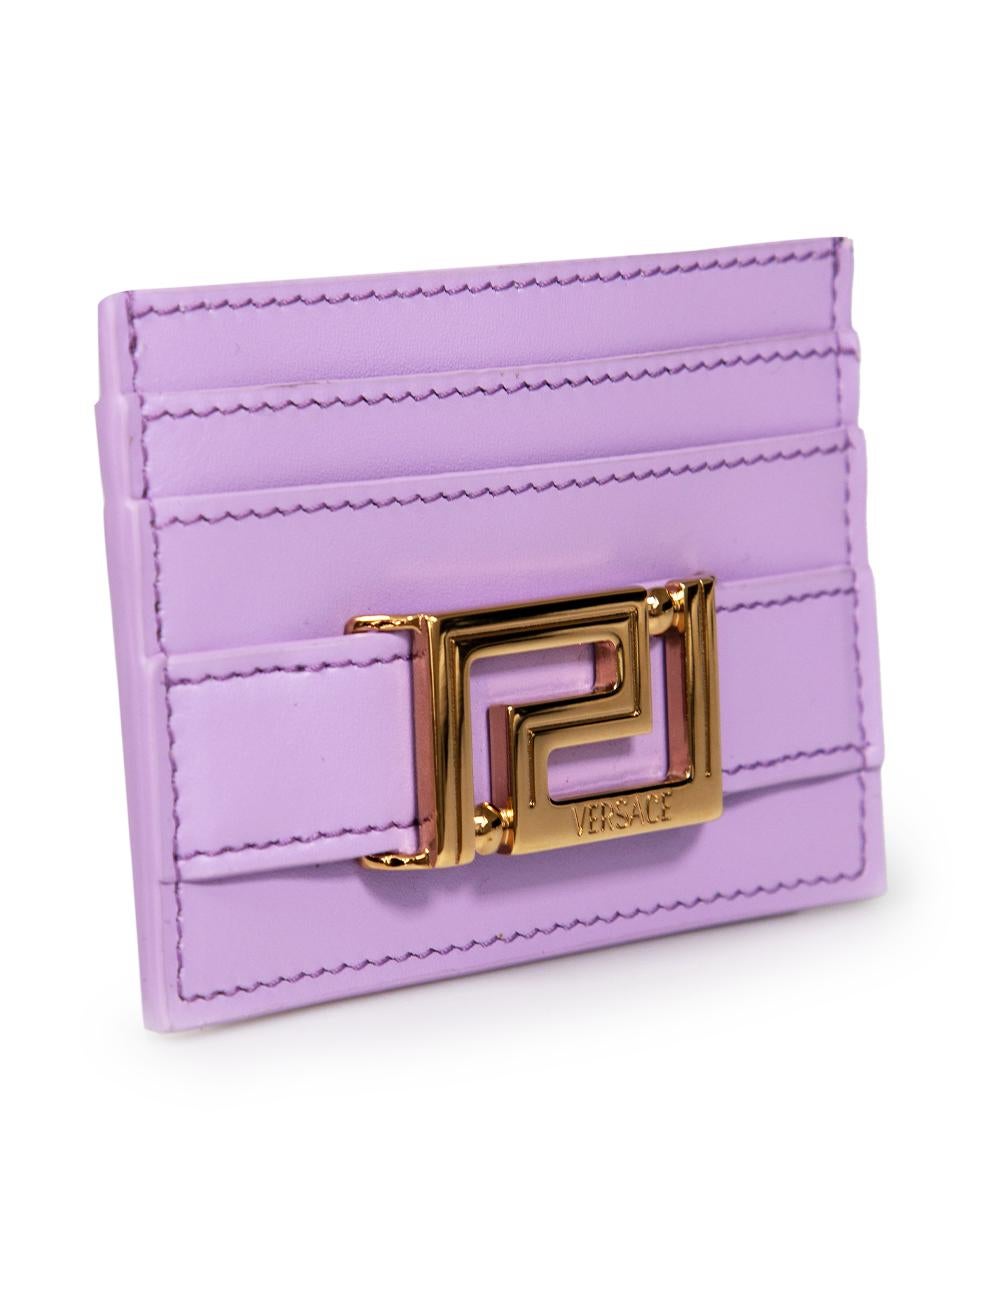 CONDITION is New with tags on this brand new Versacedesigner item. This item comes with original packaging.
 
 
 
 Details
 
 
 Model: 1007218
 
 Season: FW23
 
 Baby Violet
 
 Leather
 
 Cardholder
 
 Greca hardware
 
 4x Card slots
 
 Slip